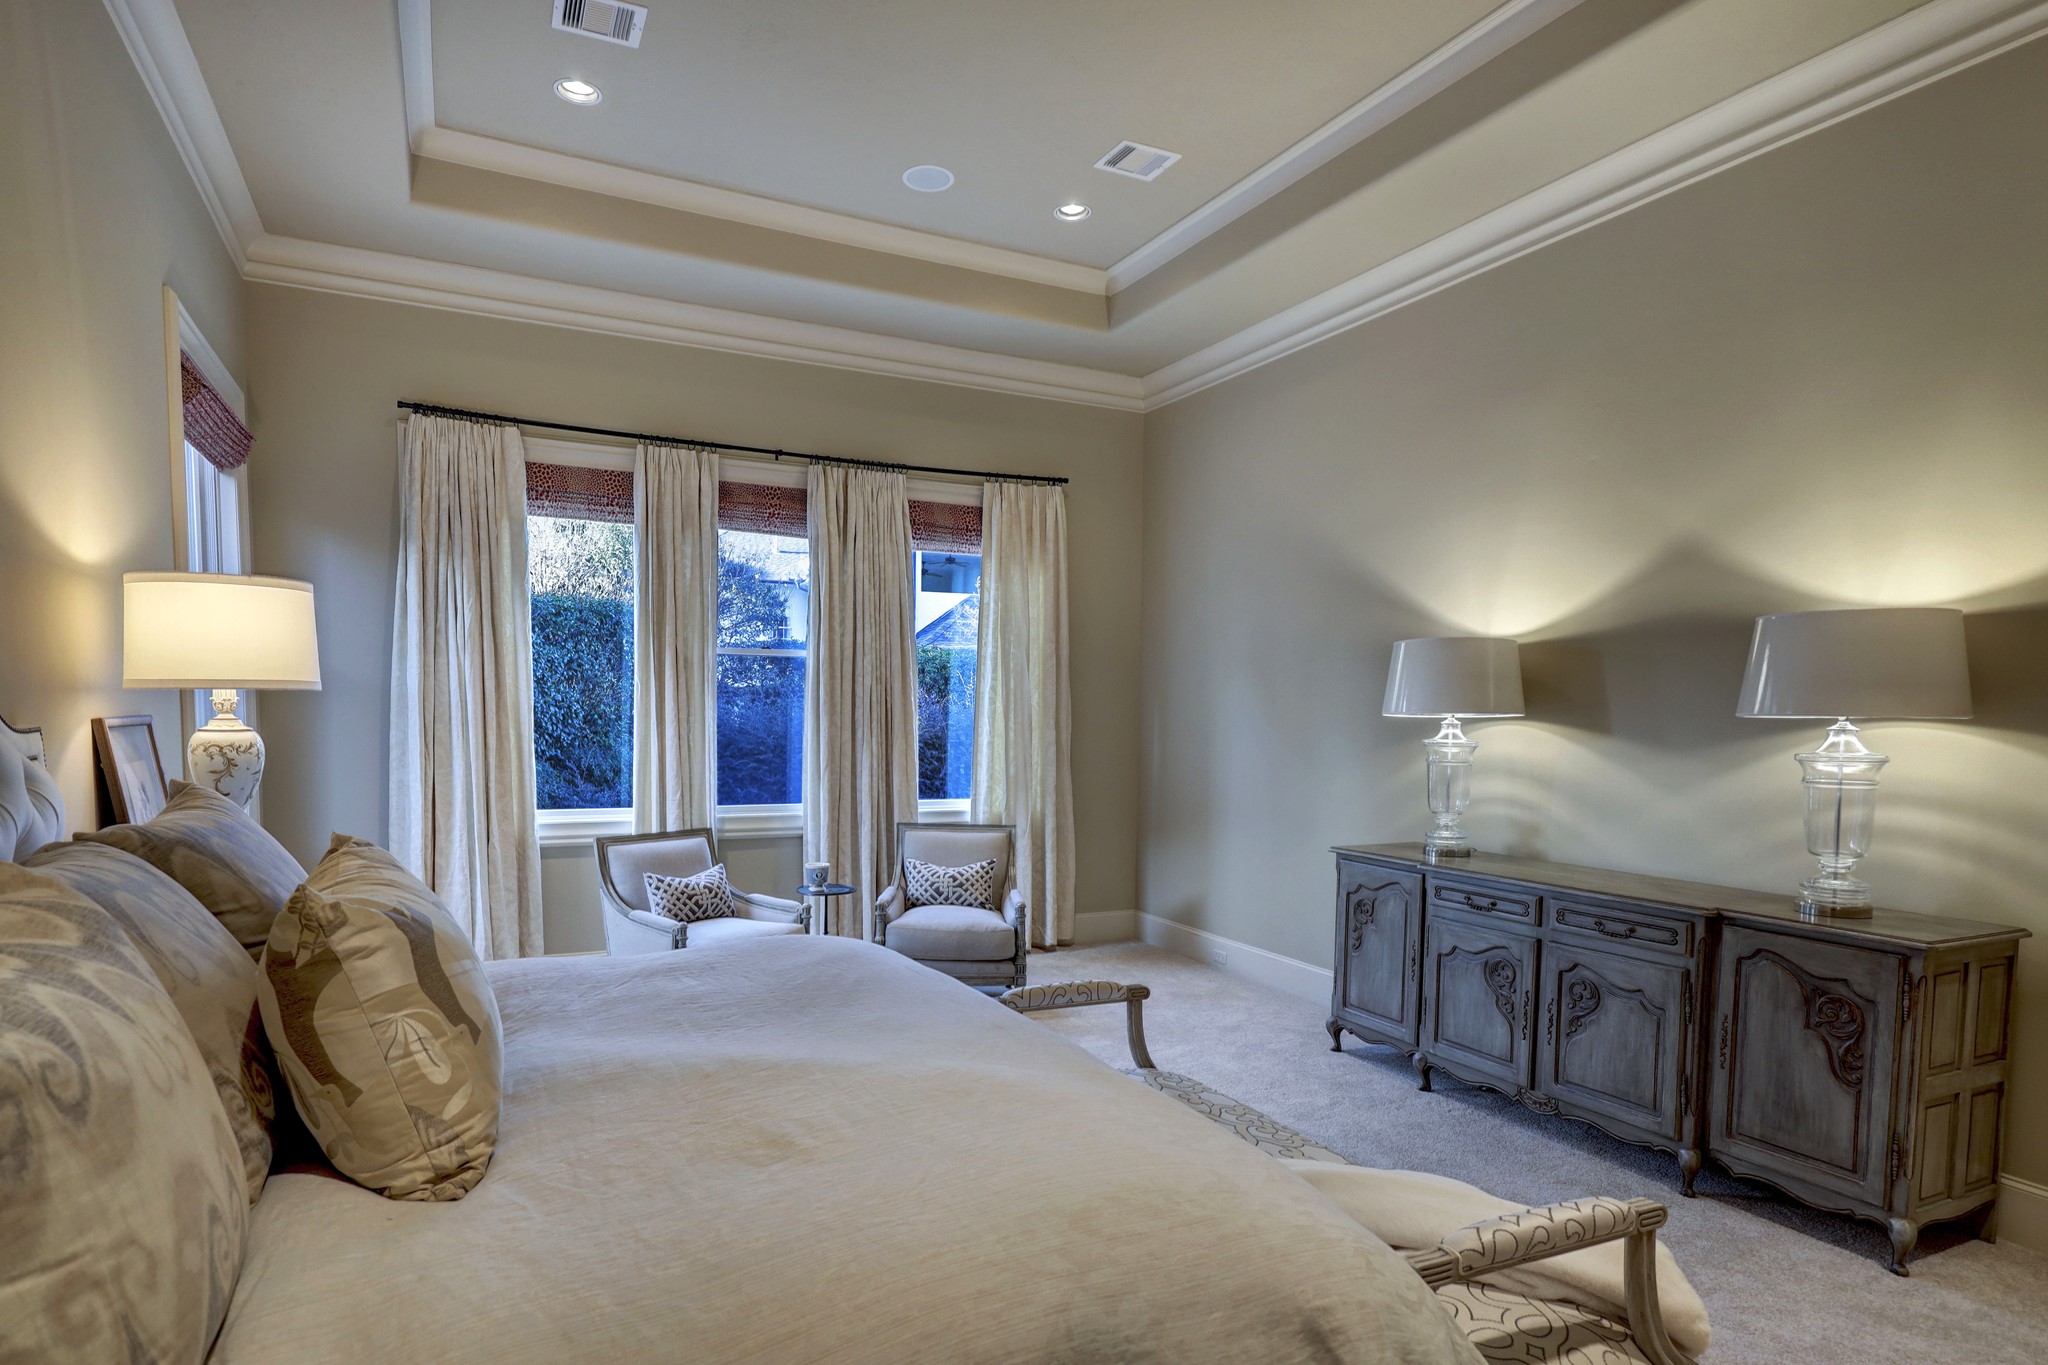 The first floor owner's suite is an oasis of calm featuring neutral carpet, a tray ceiling, can lighting, and chandelier capability.